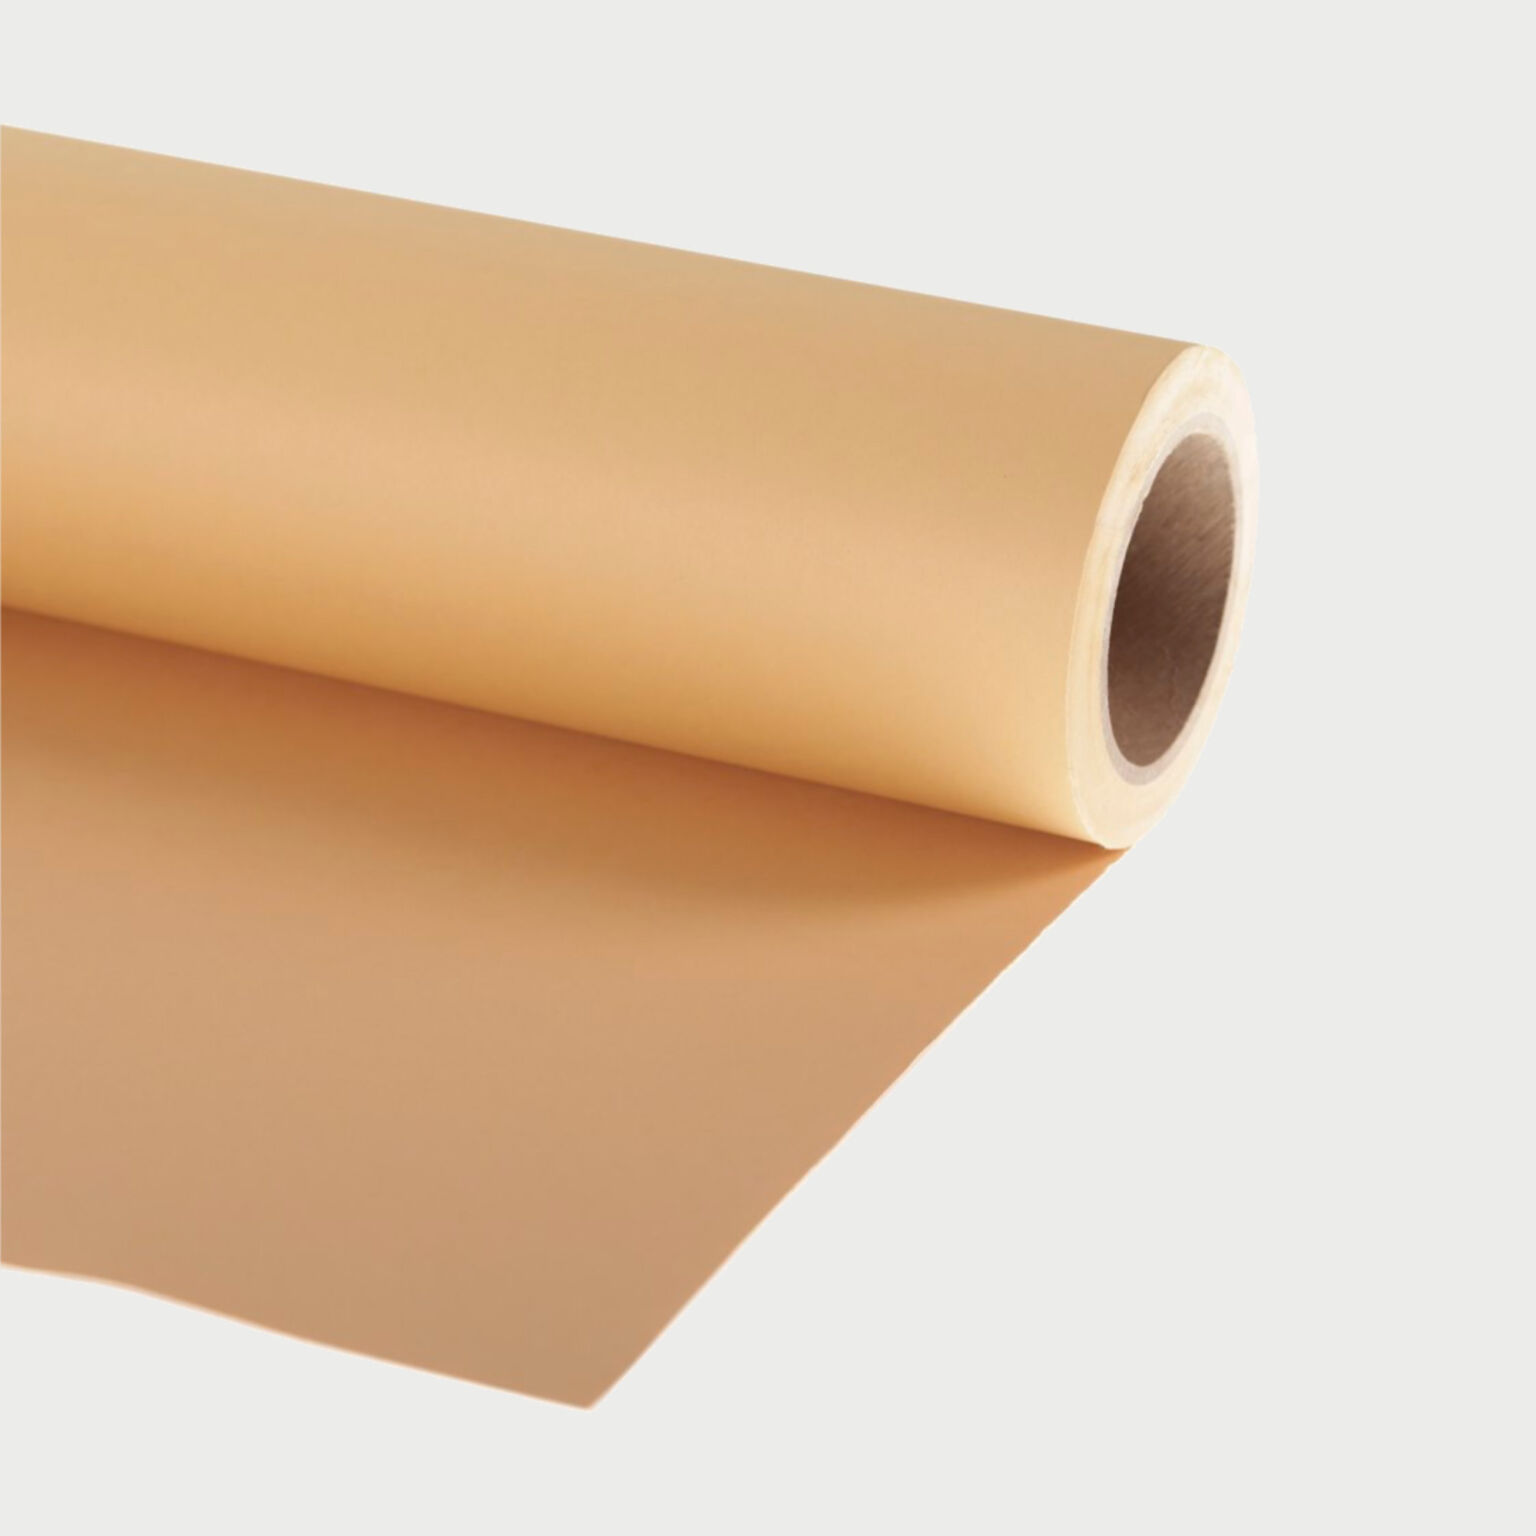 Manfrotto Paper Sandstone Seamless Background Paper 2 72m X 11m